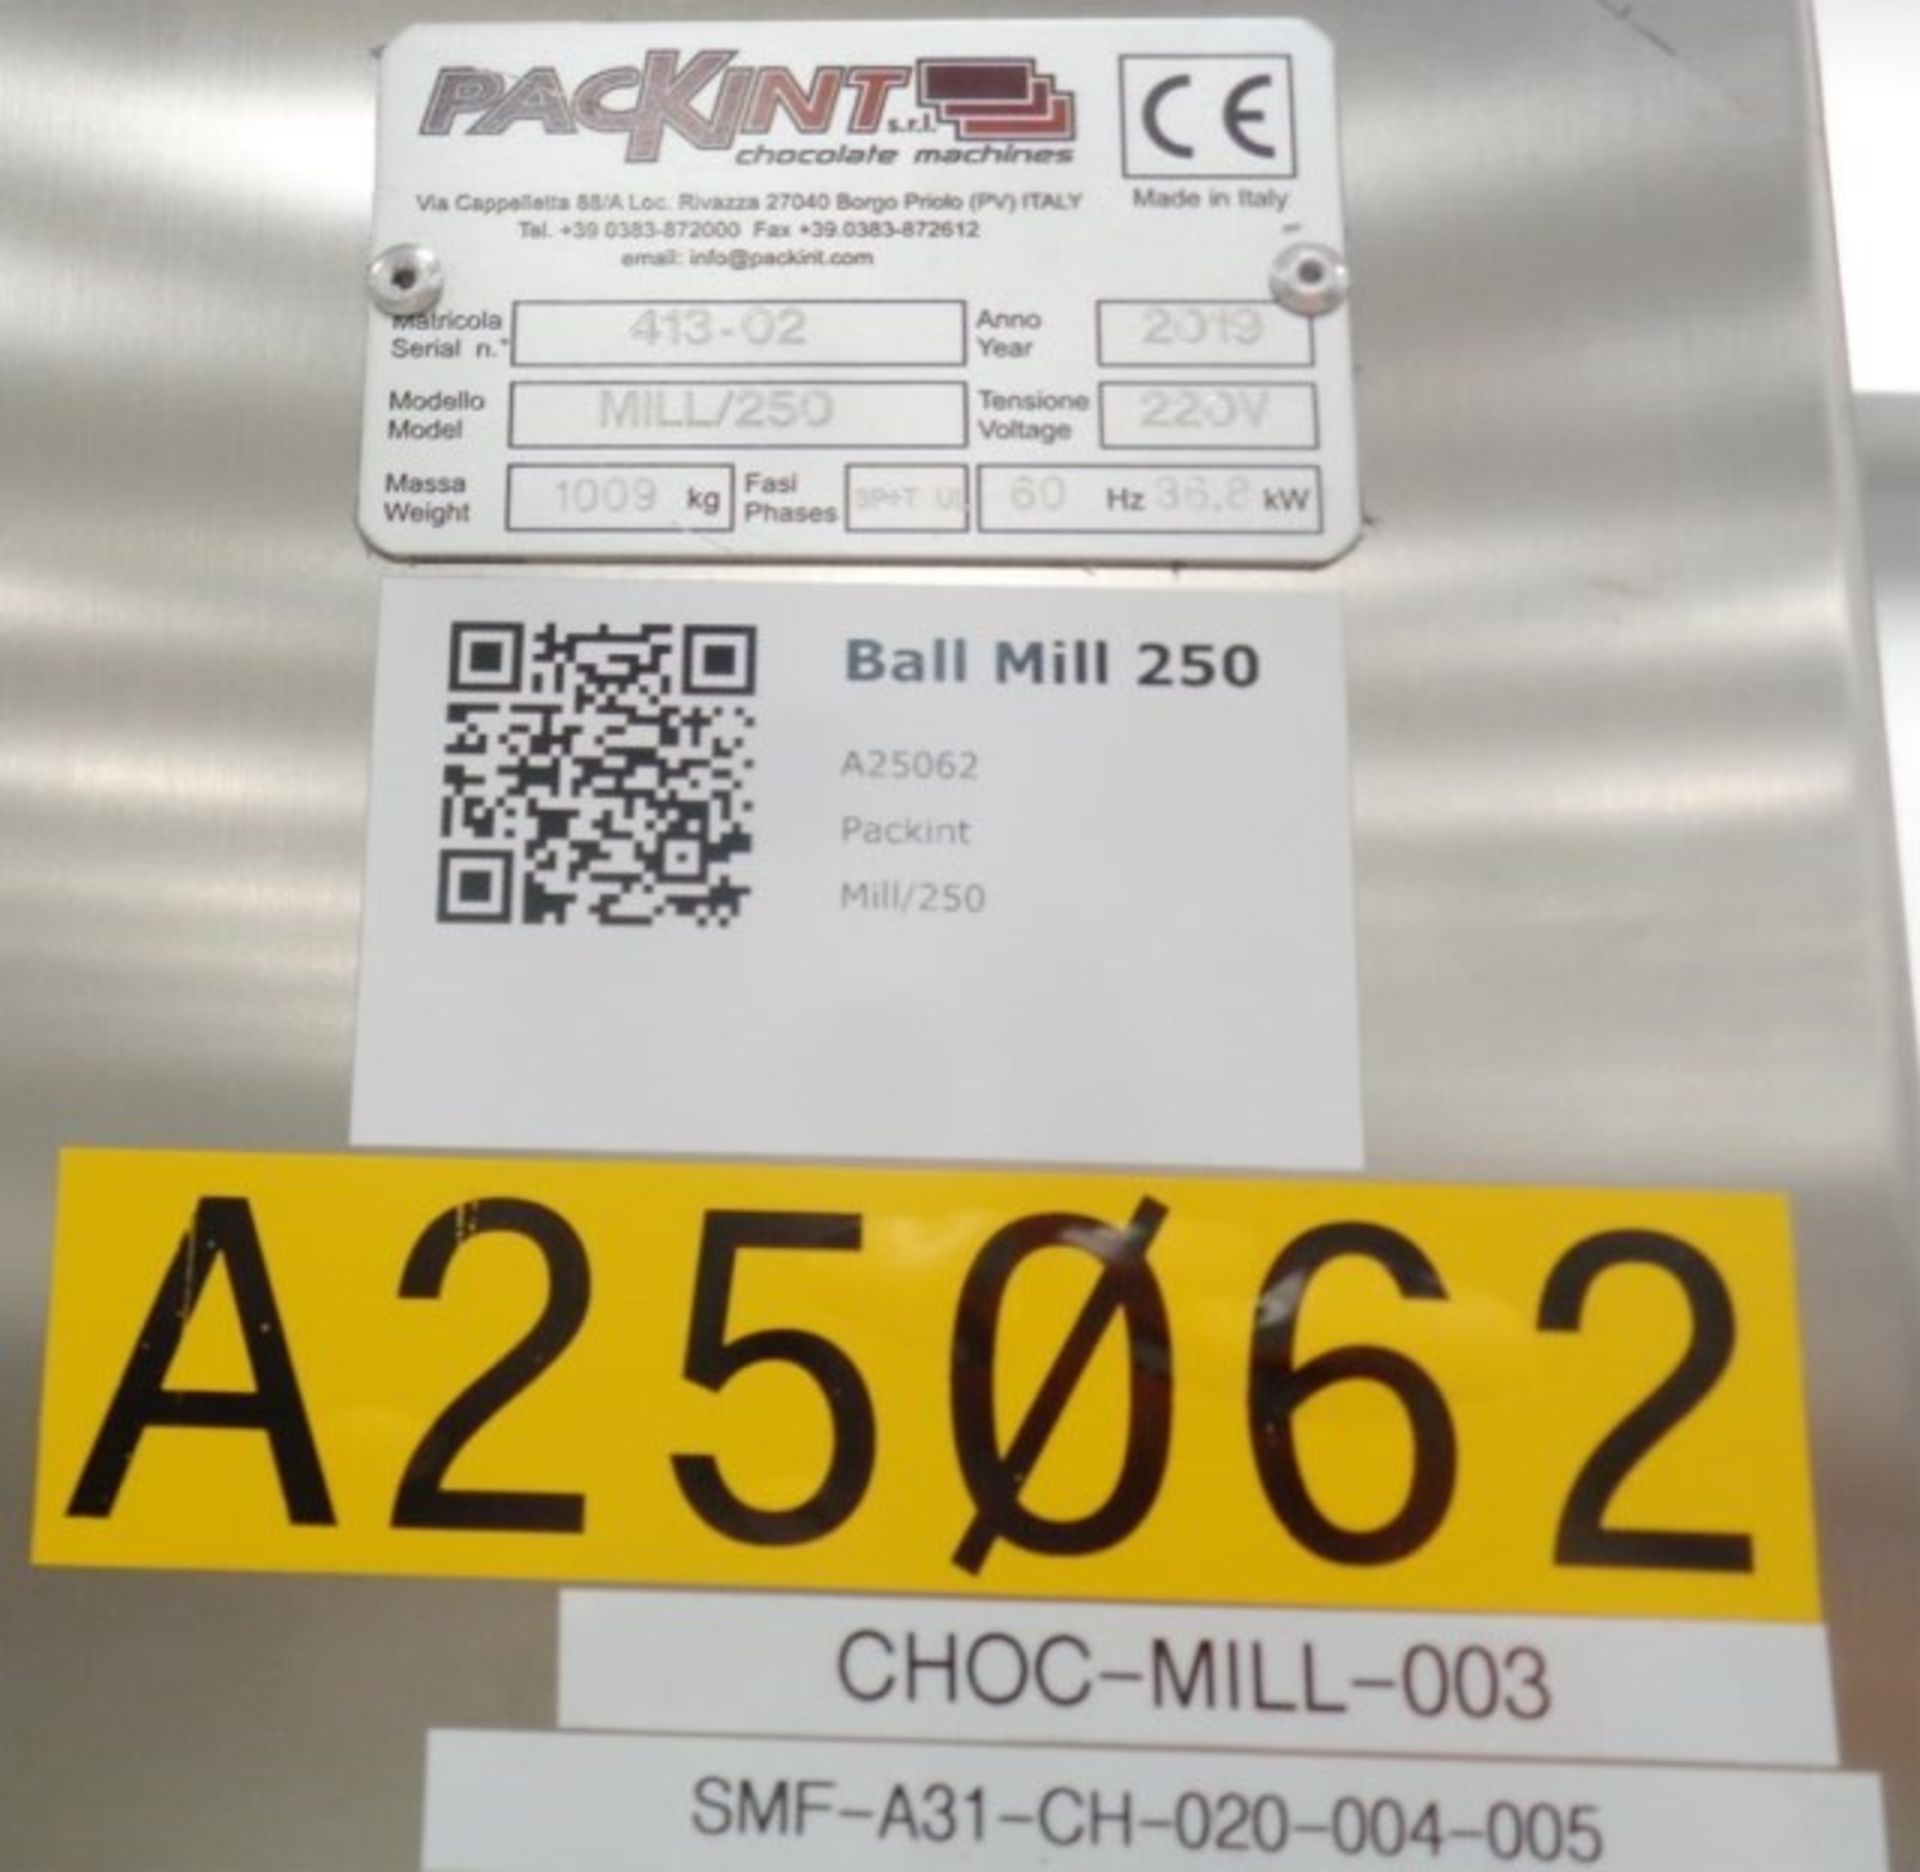 Stainless Steel Jacketed Ball Mill - Image 4 of 5